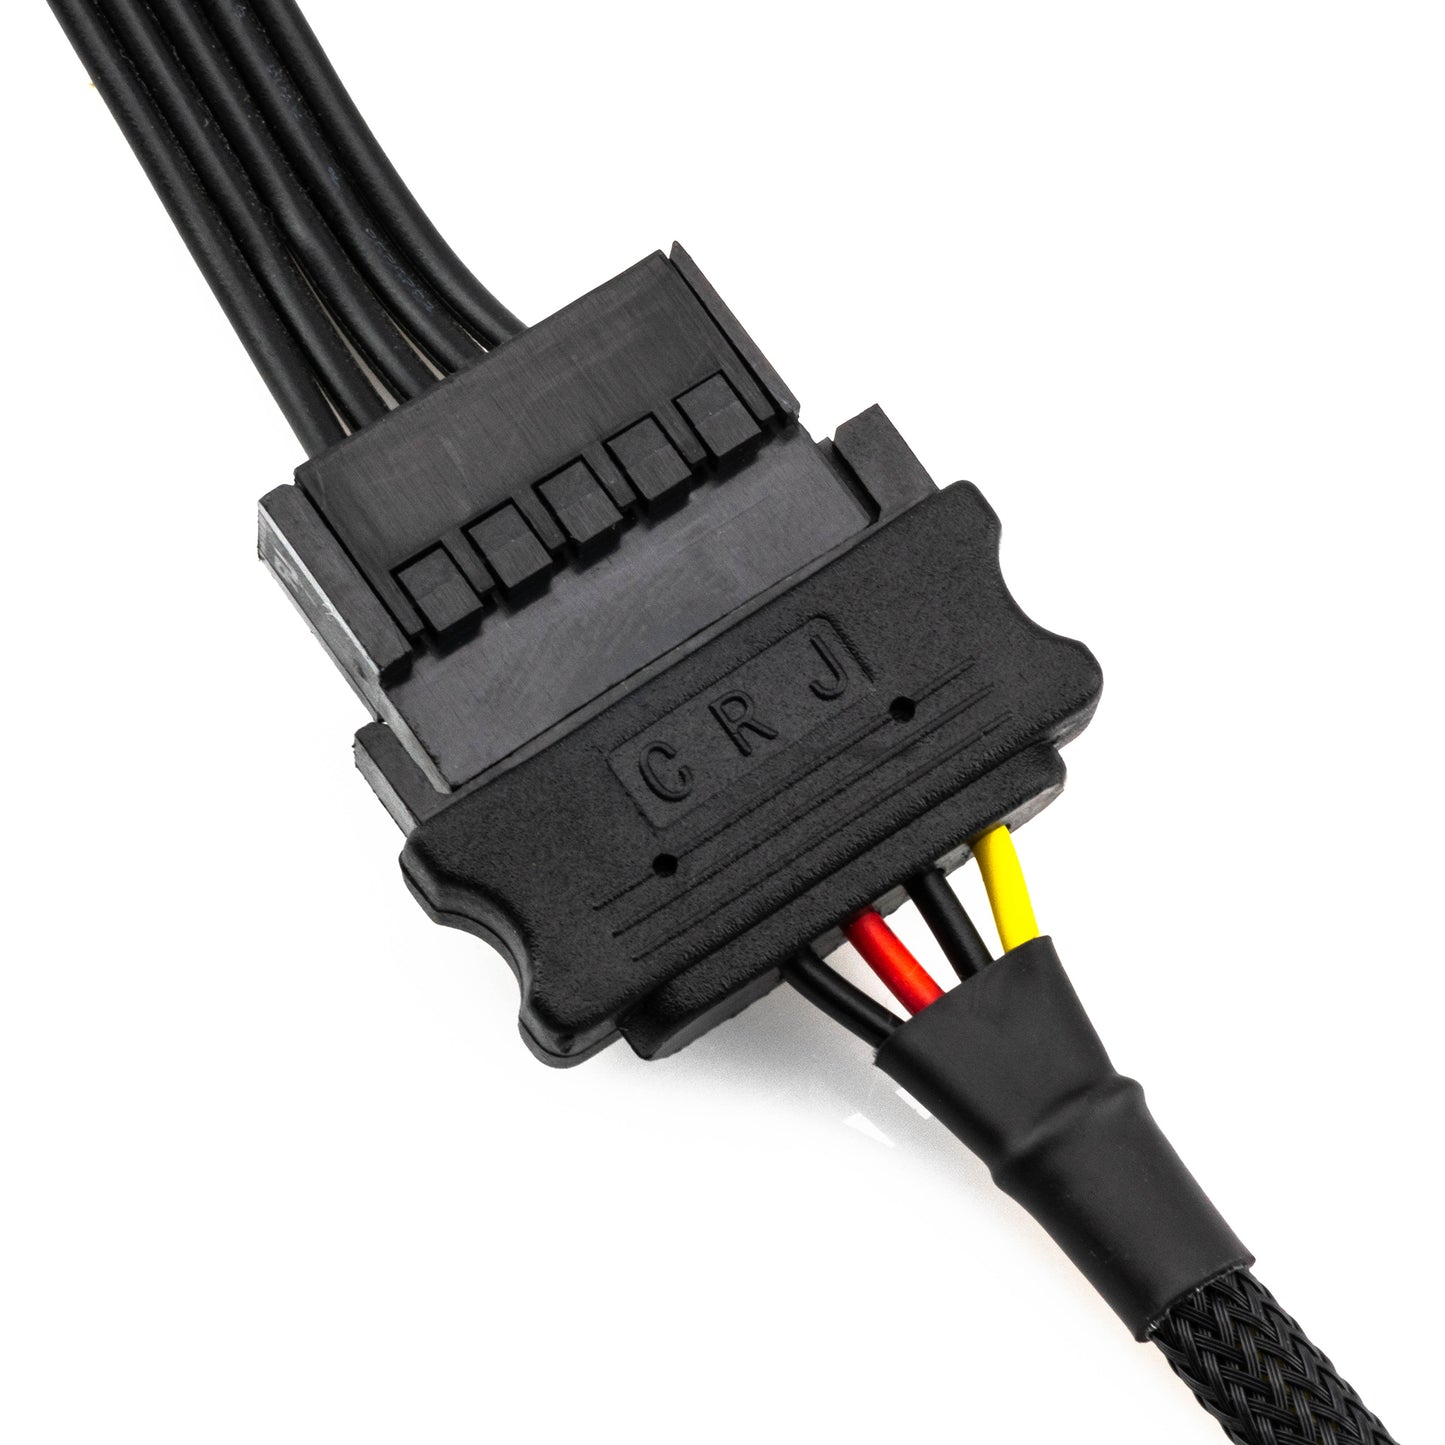 SATA Power Extension Cable with High Density Black Sleeving 24"